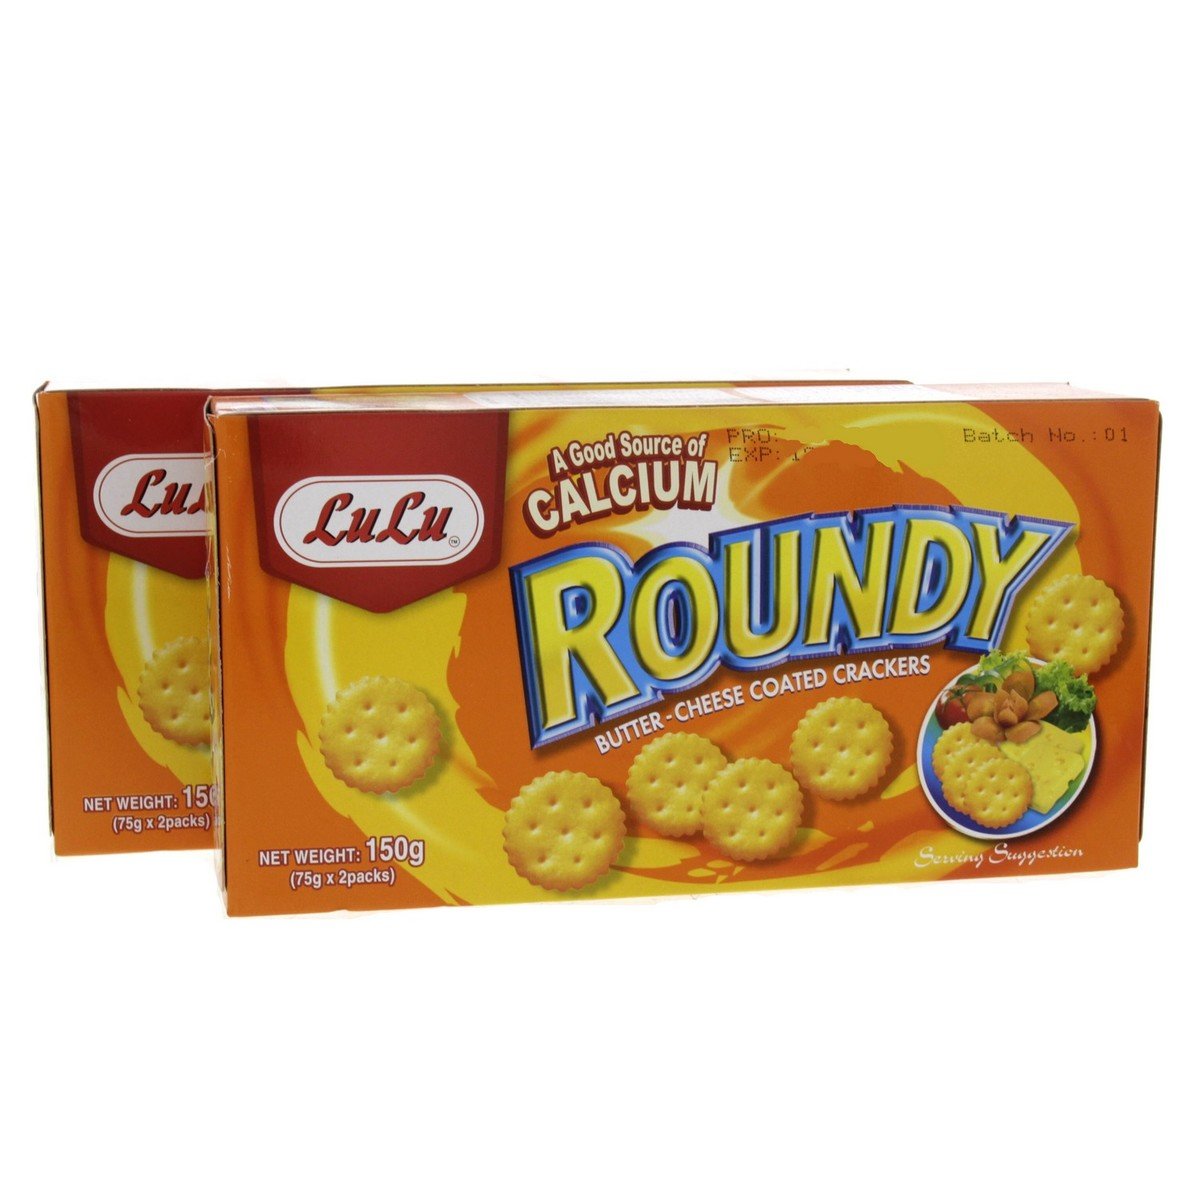 LuLu Roundy Butter Cheese Coated Crackers 2 x 150 g